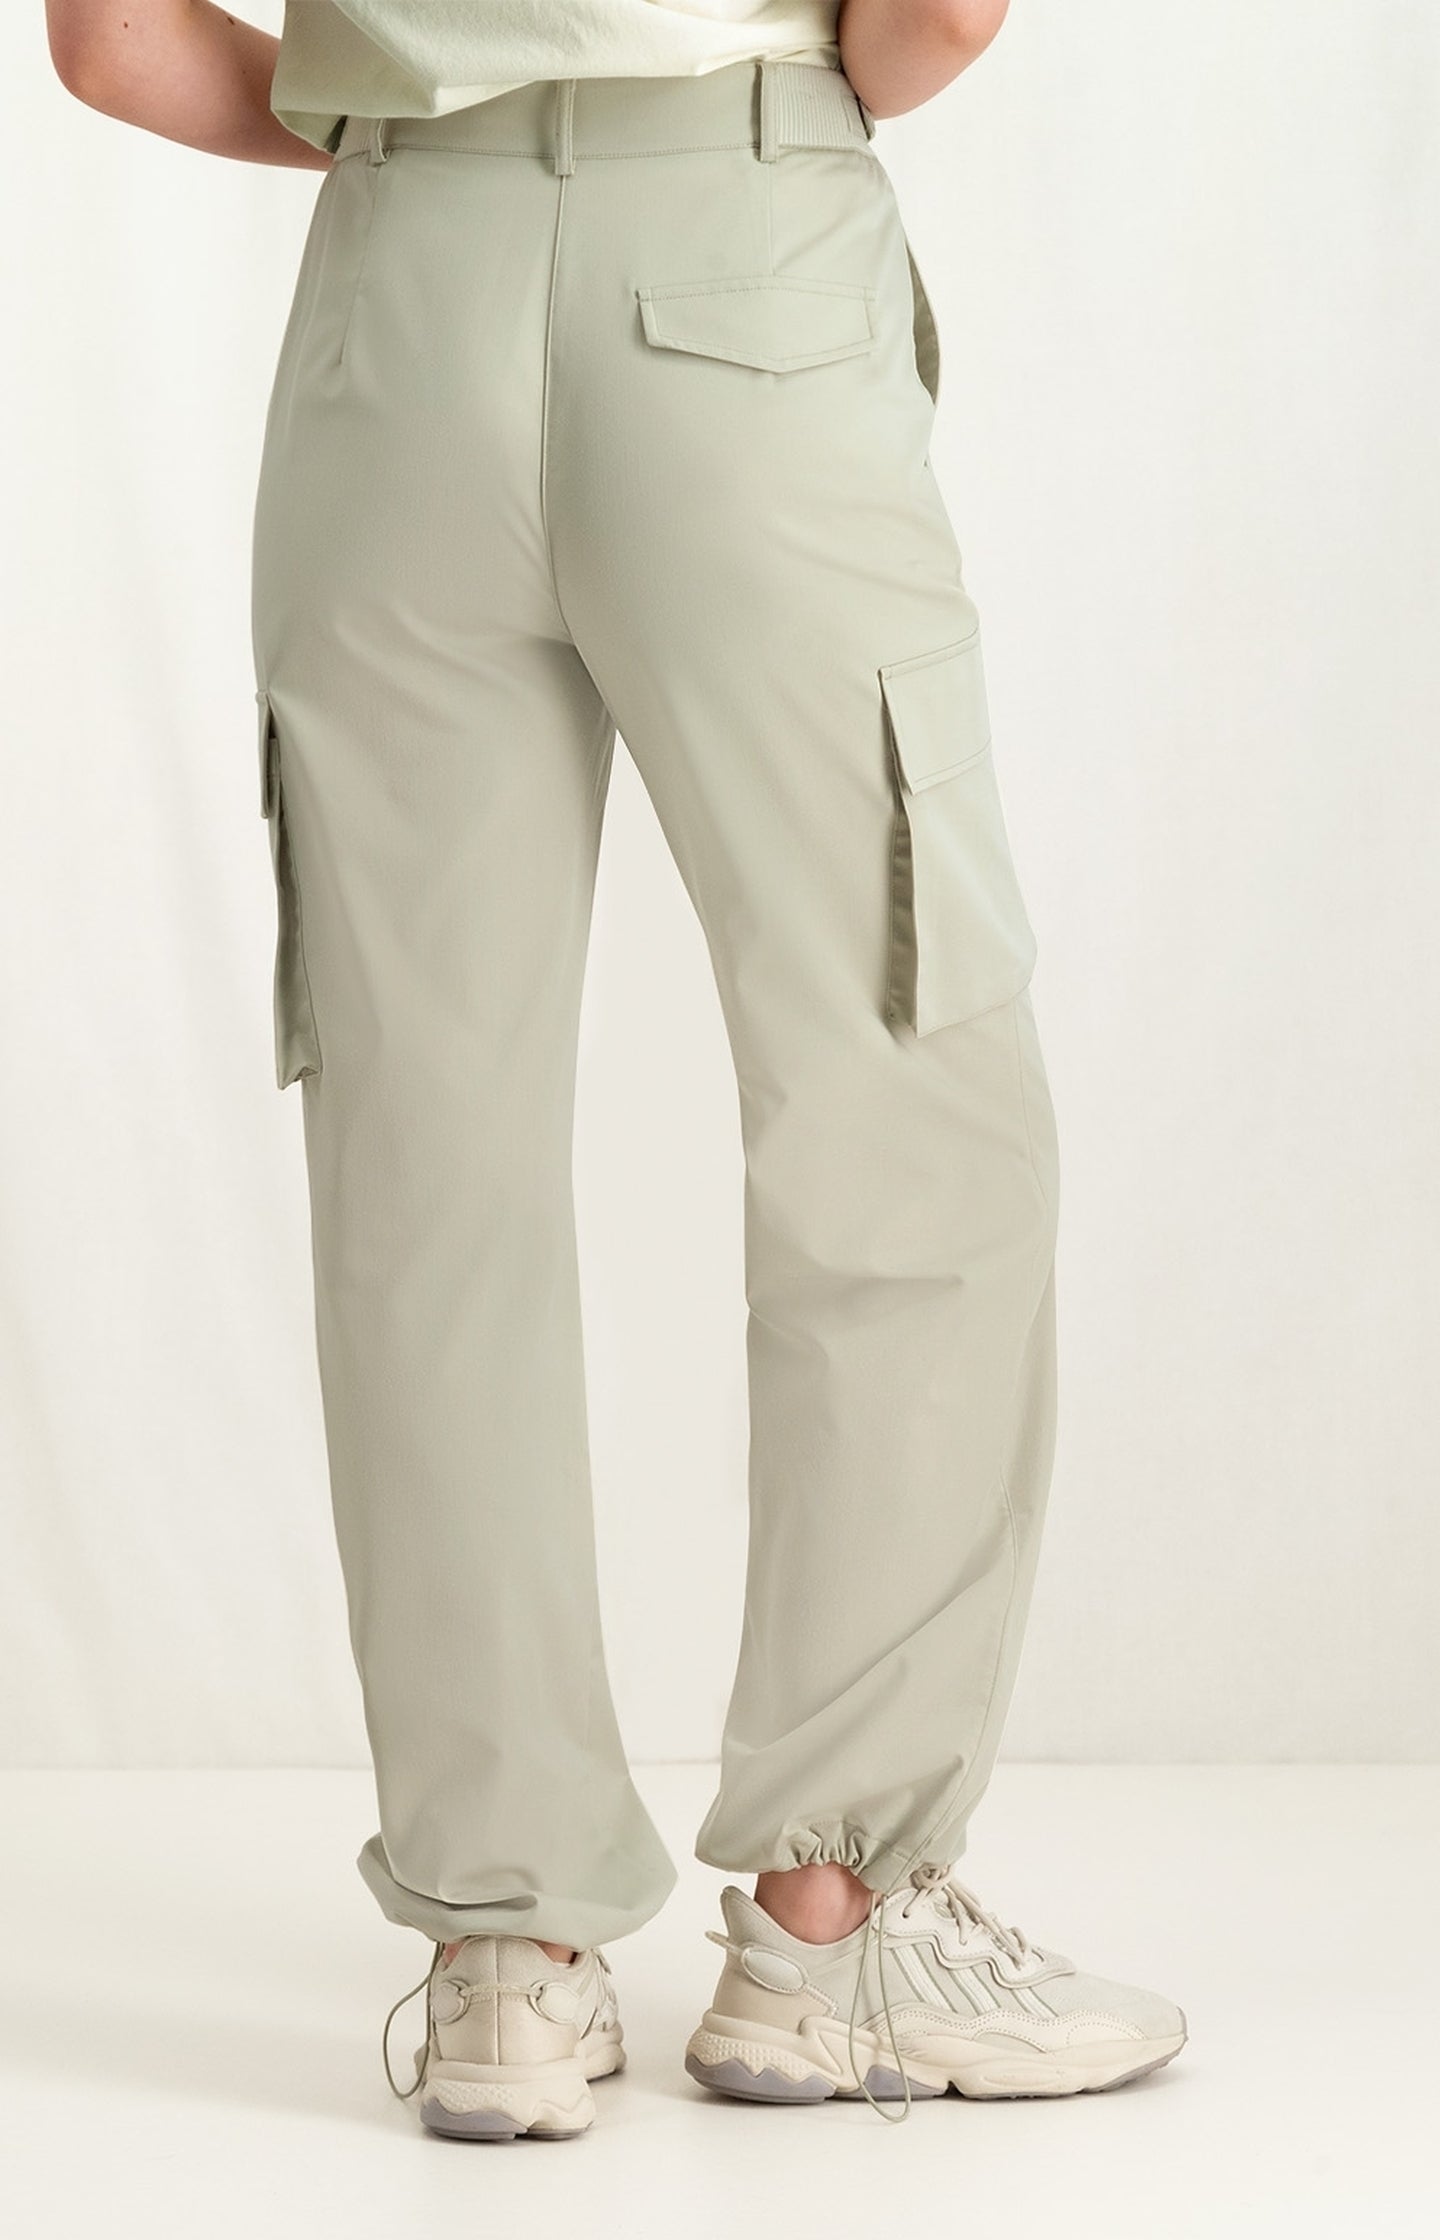 Cargo trousers with wide legs, pockets and waist details